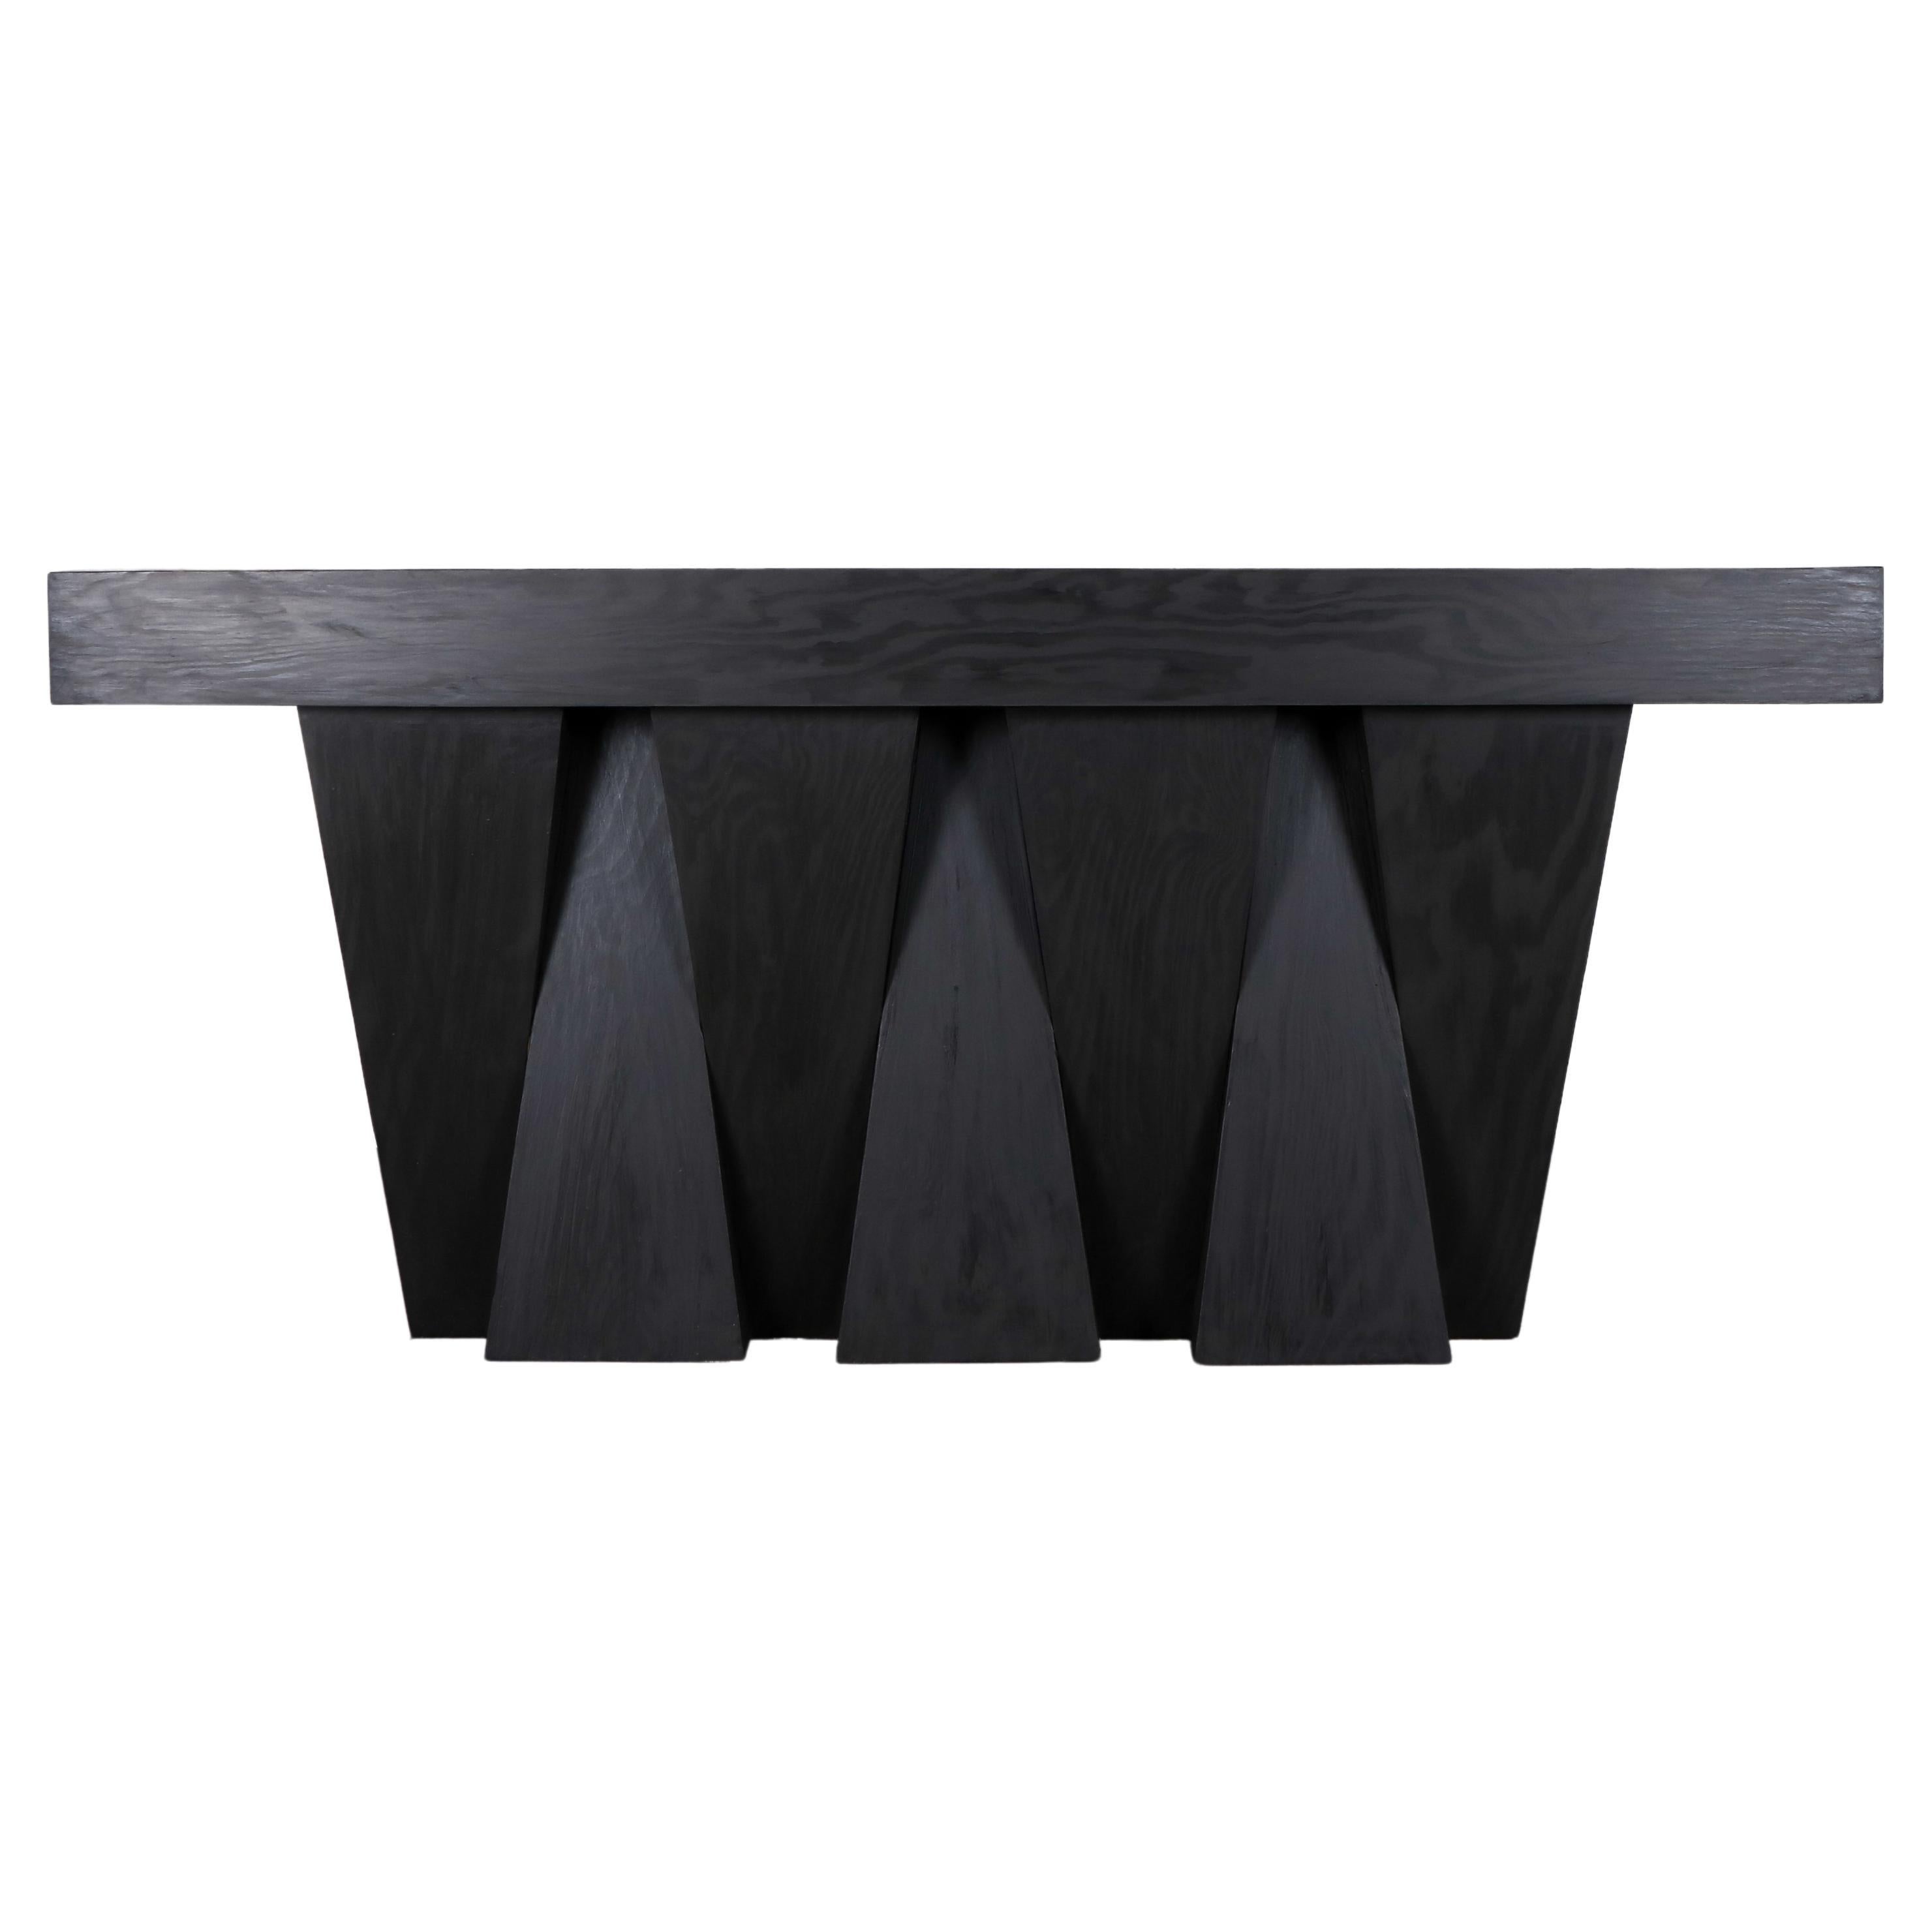 Contemporary Black Console in Hand-Waxed Plywood - Antites by Lucas Morten